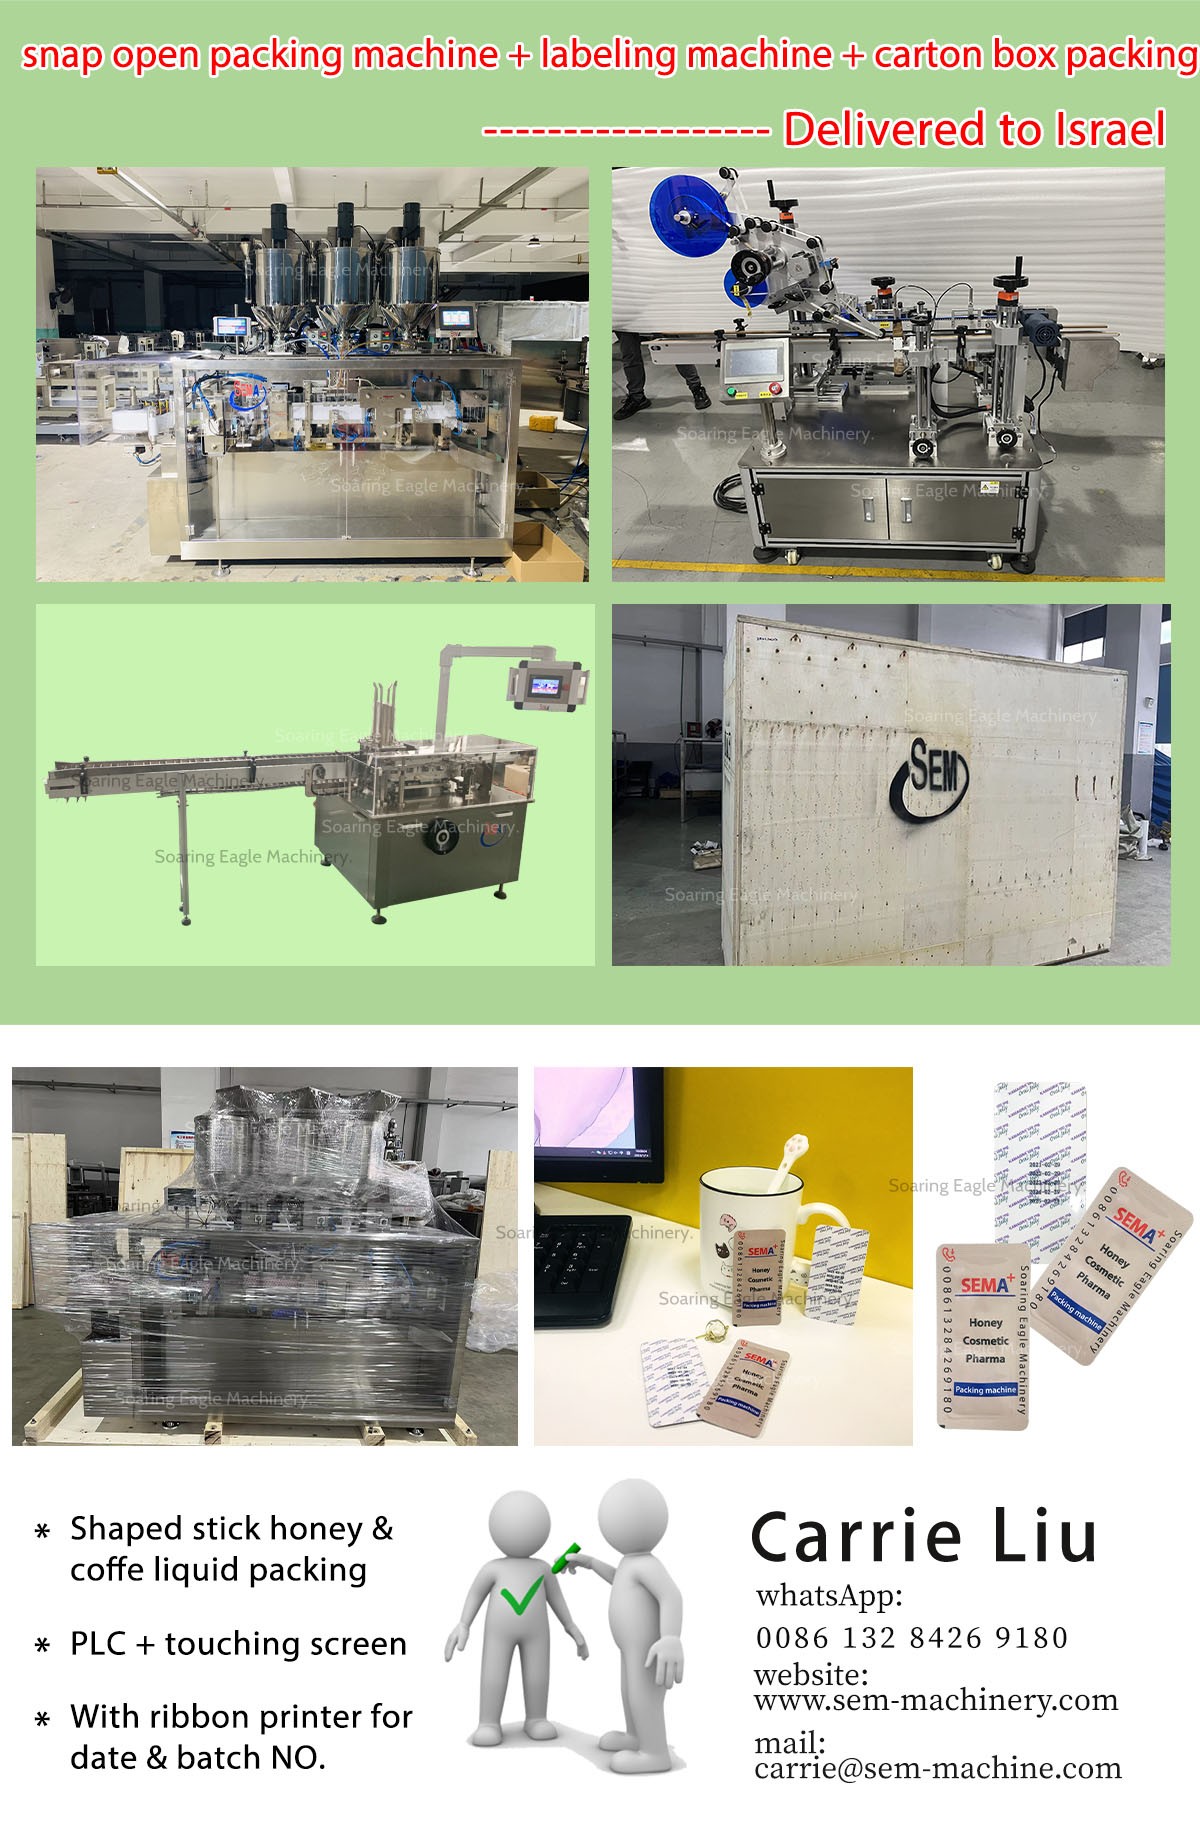 Easy Snap sachet packing machine + labeling machine + carton box packing machine ——Delivered to Israel